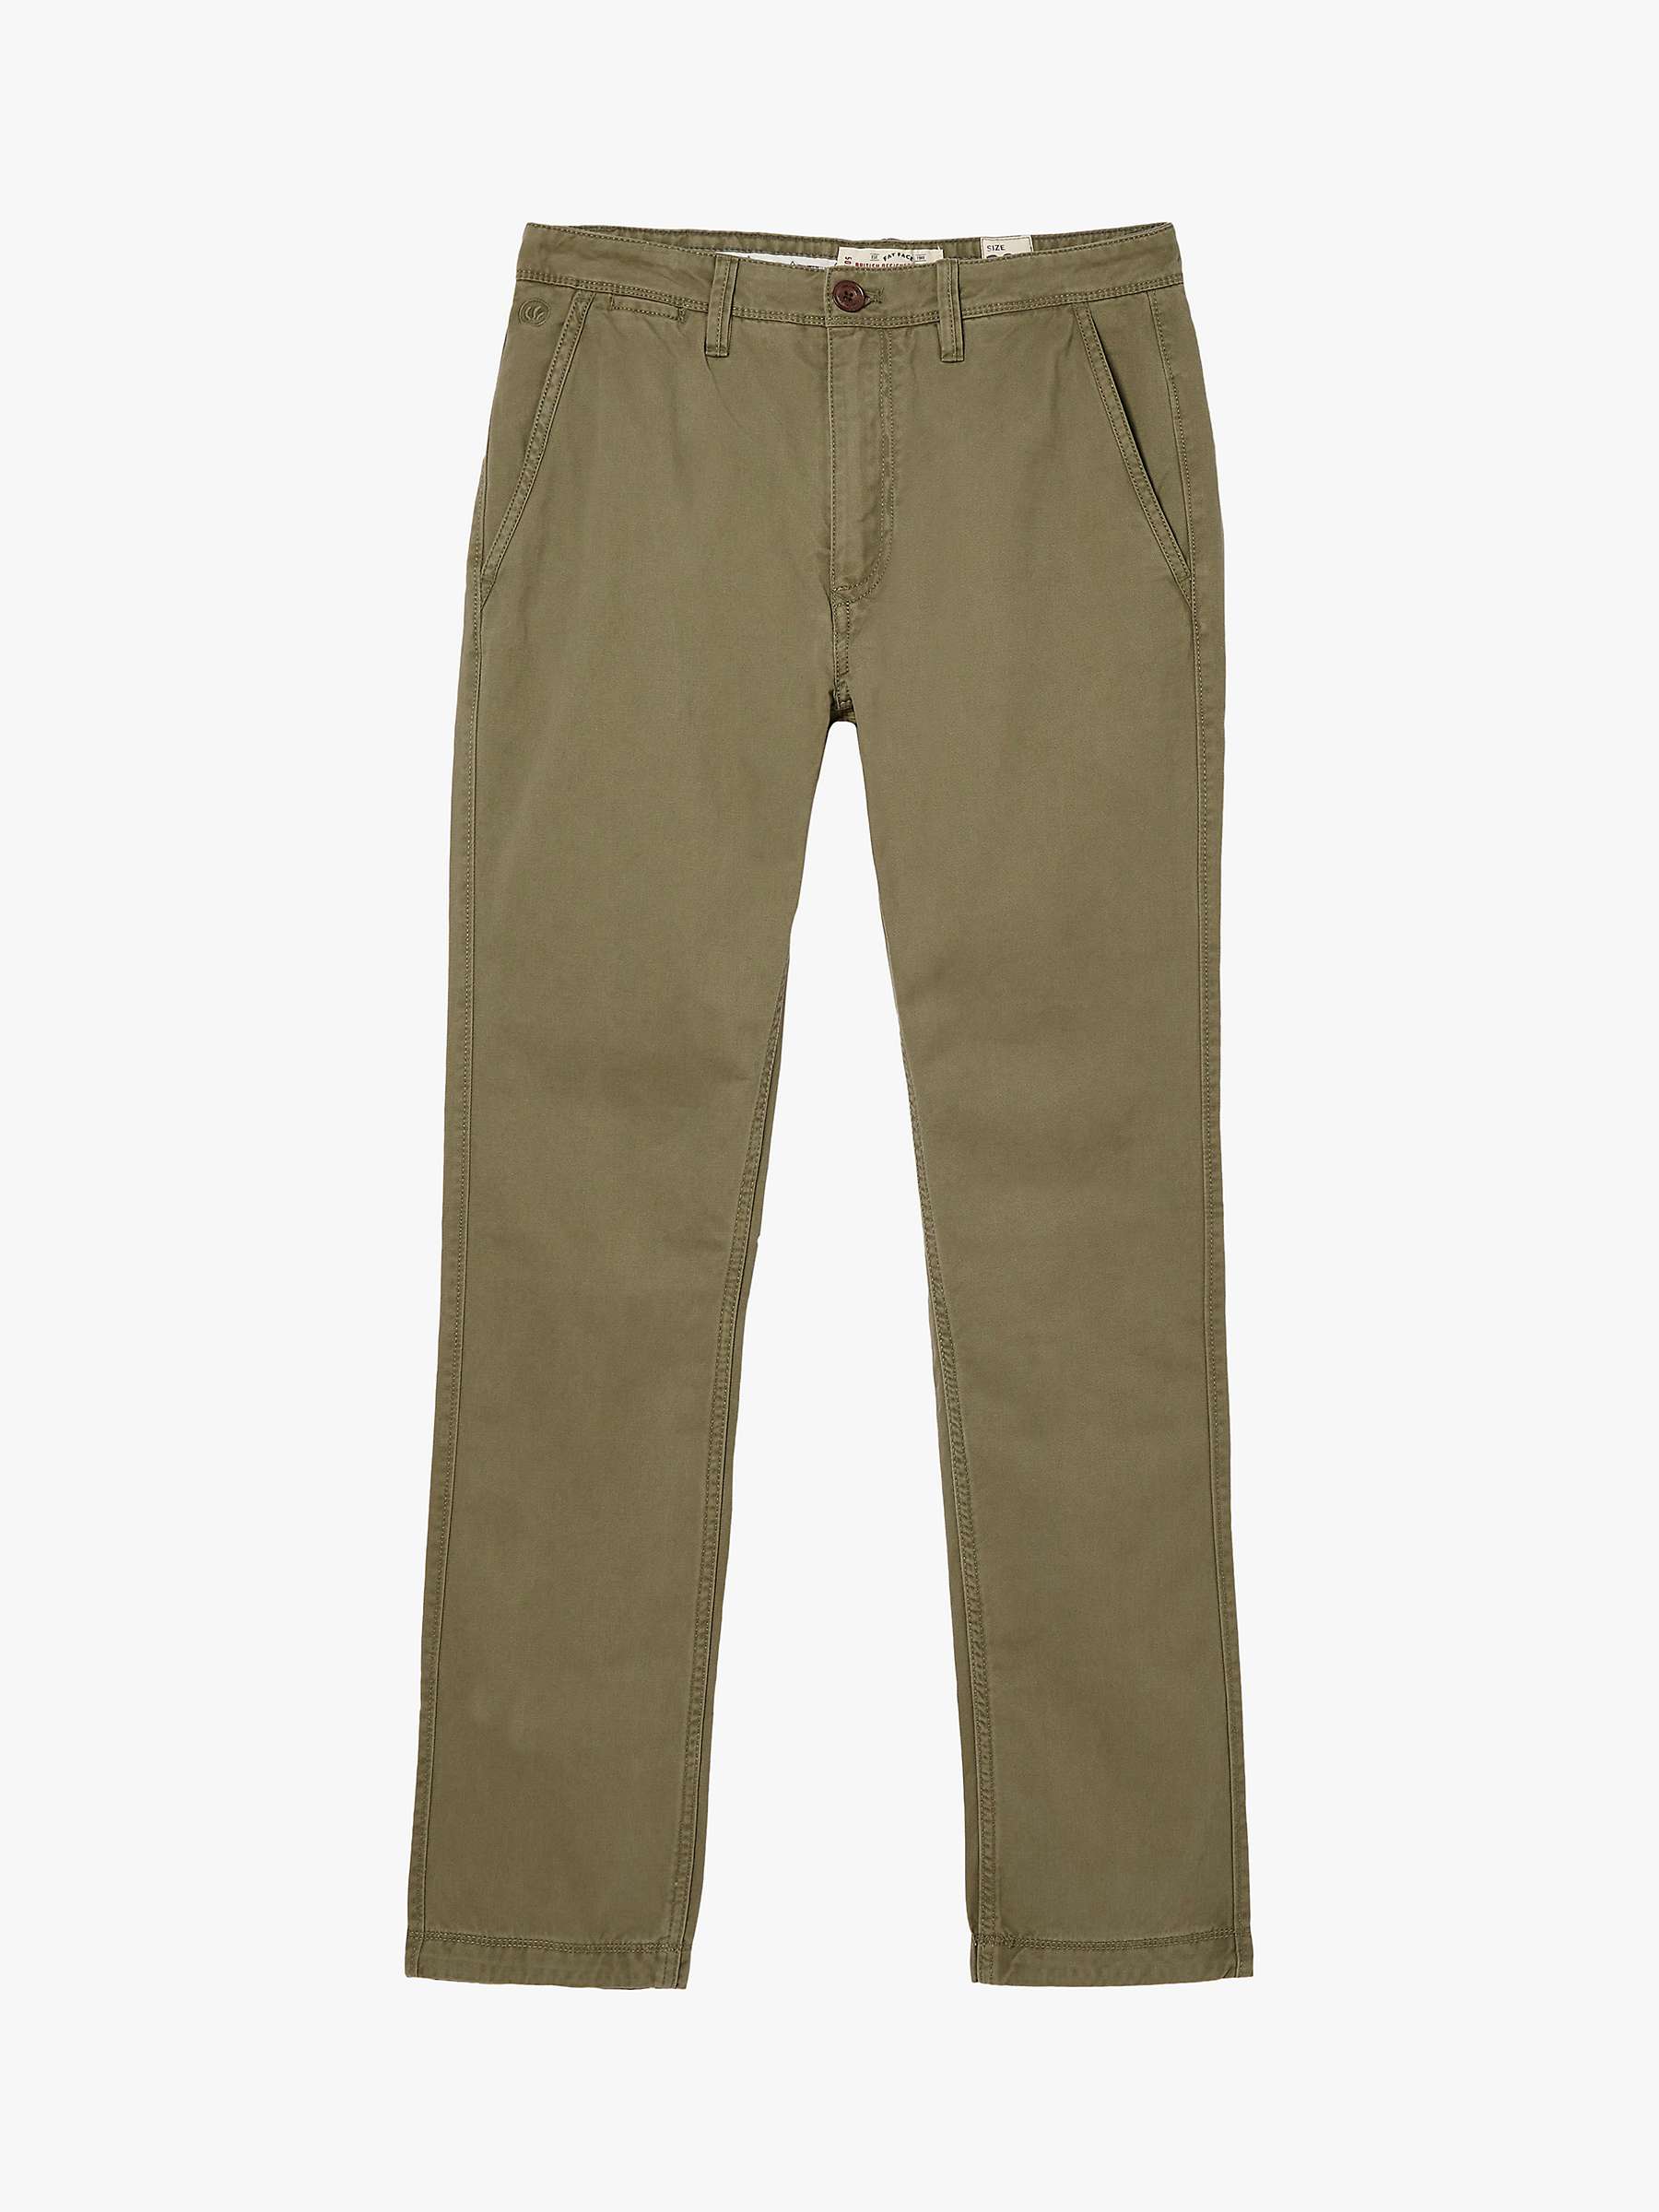 Buy FatFace Coastal Straight Fit Chinos Online at johnlewis.com